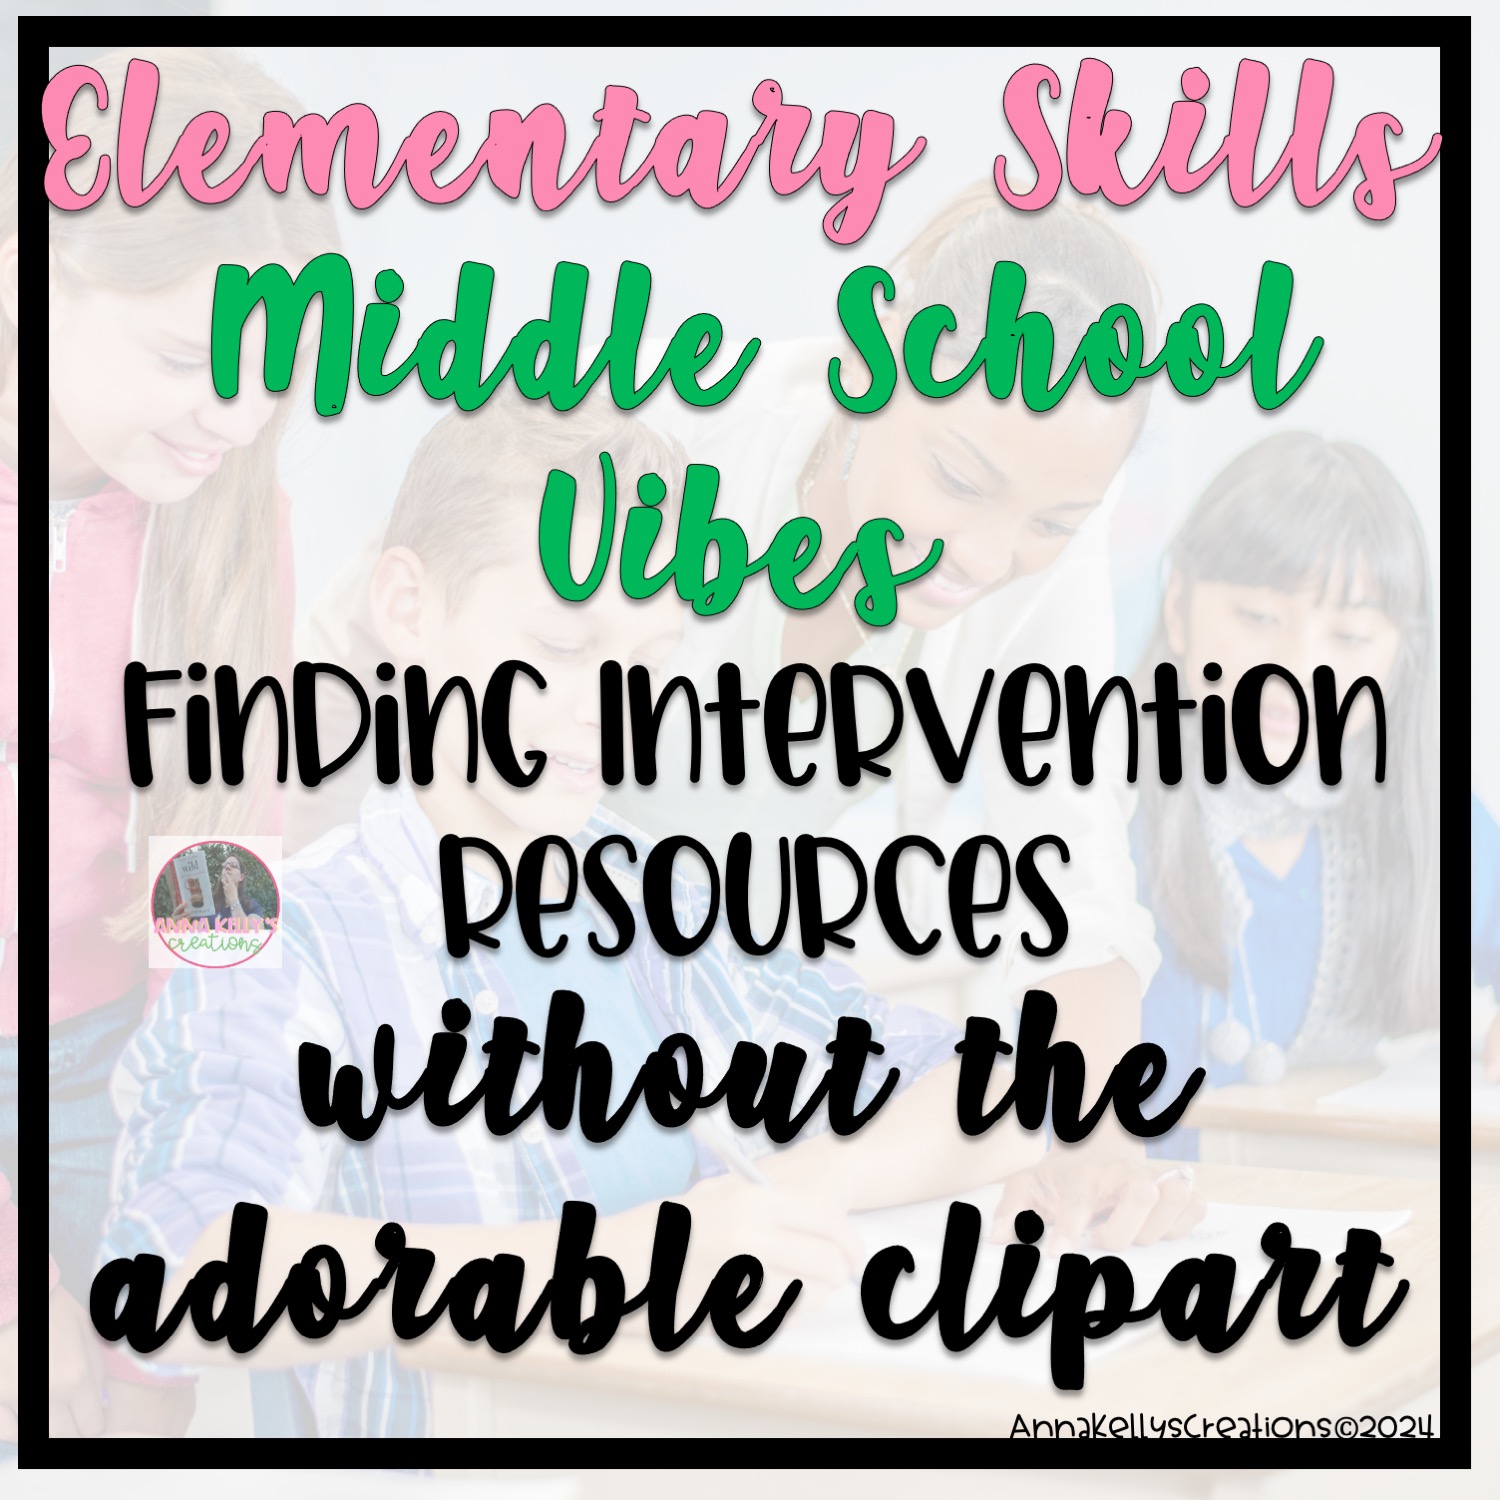 You are currently viewing Elementary Skills, Middle School Vibes: Finding Intervention Resources without the Adorable Clipart